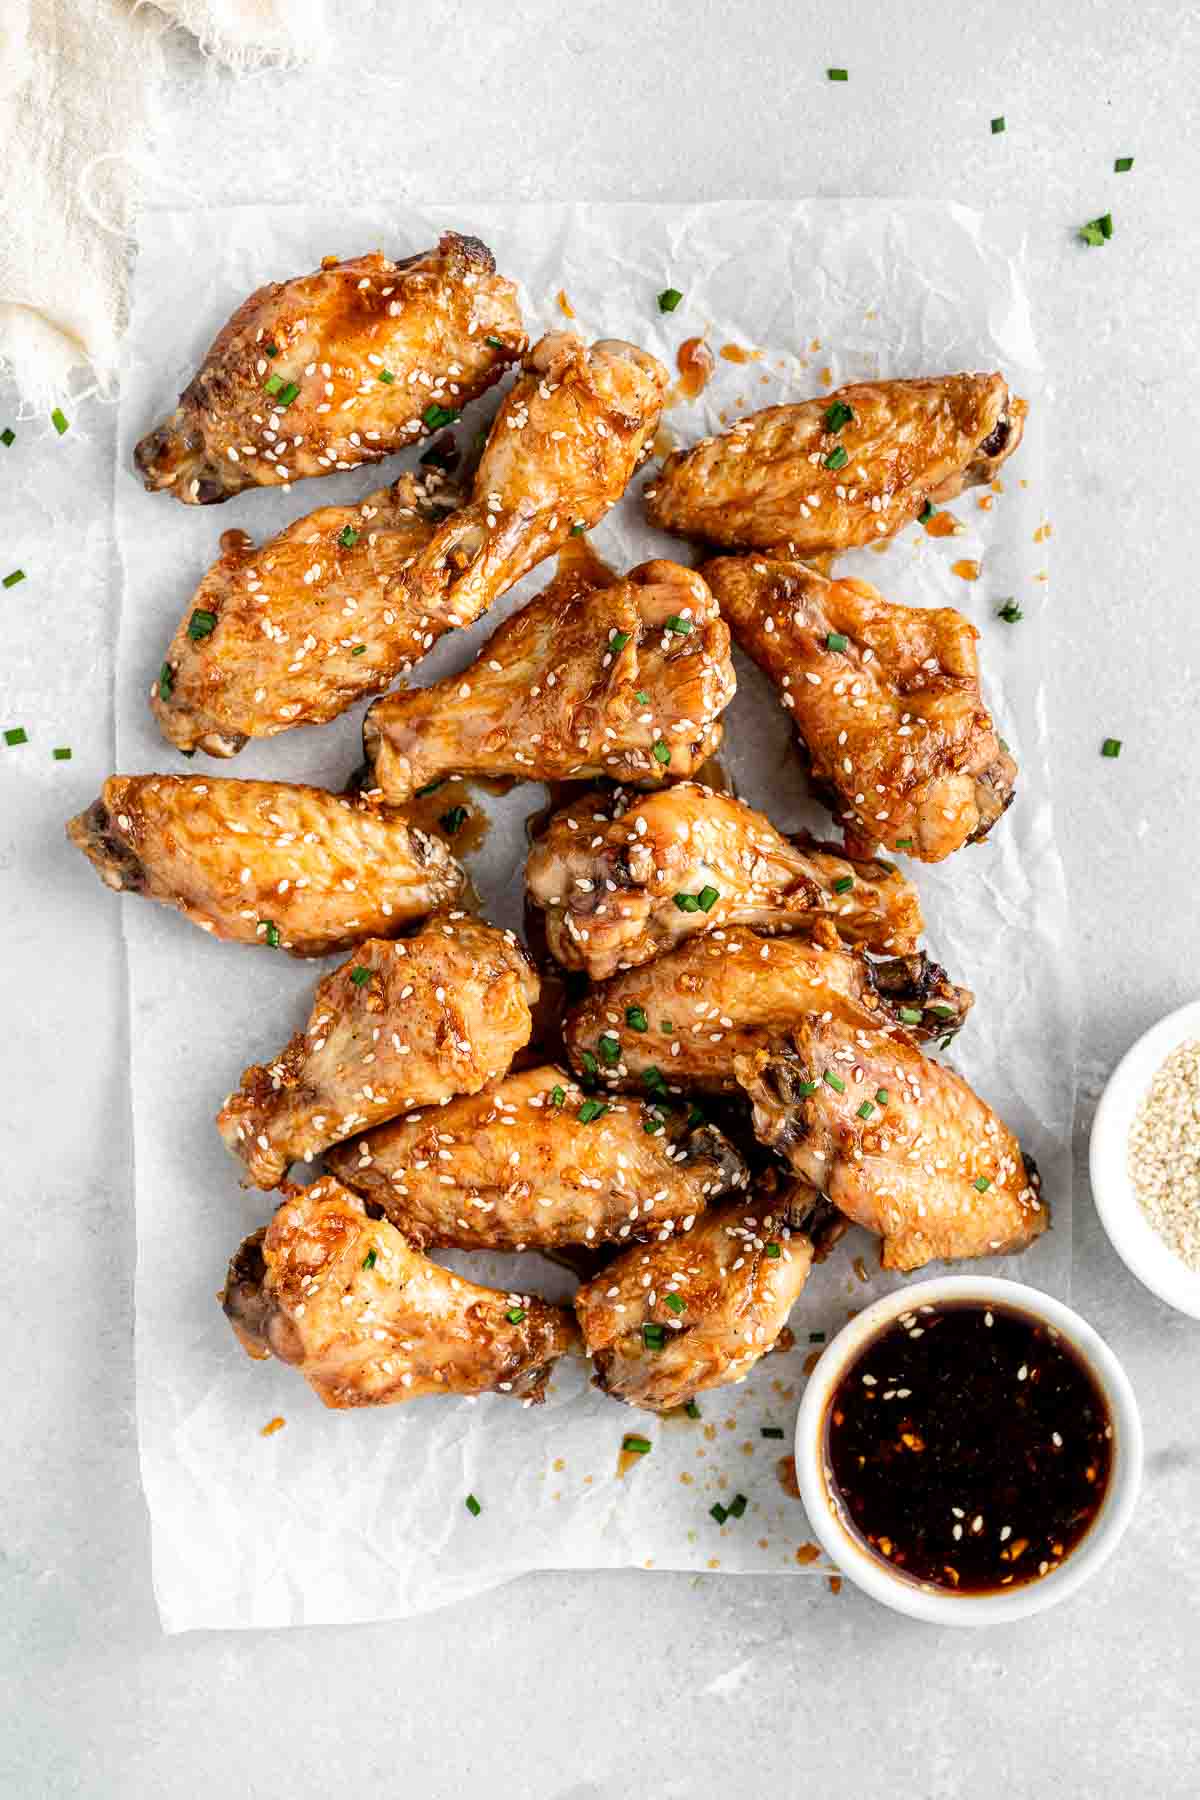 Honey garlic chicken wings with sesame seeds and chives on baking paper.